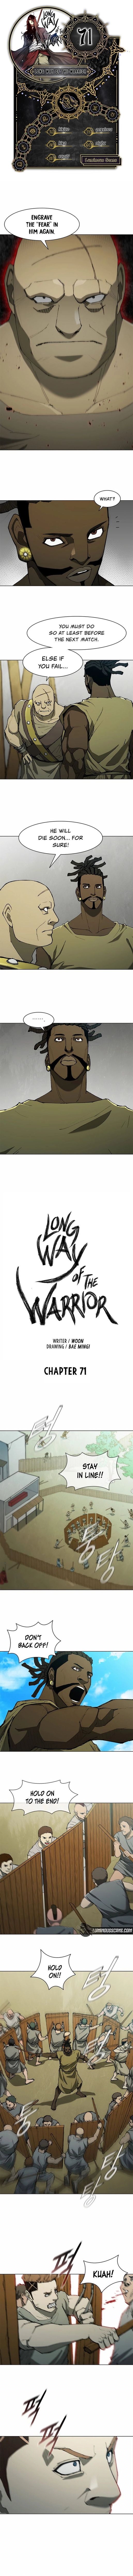 long-way-of-the-warrior-chap-71-0